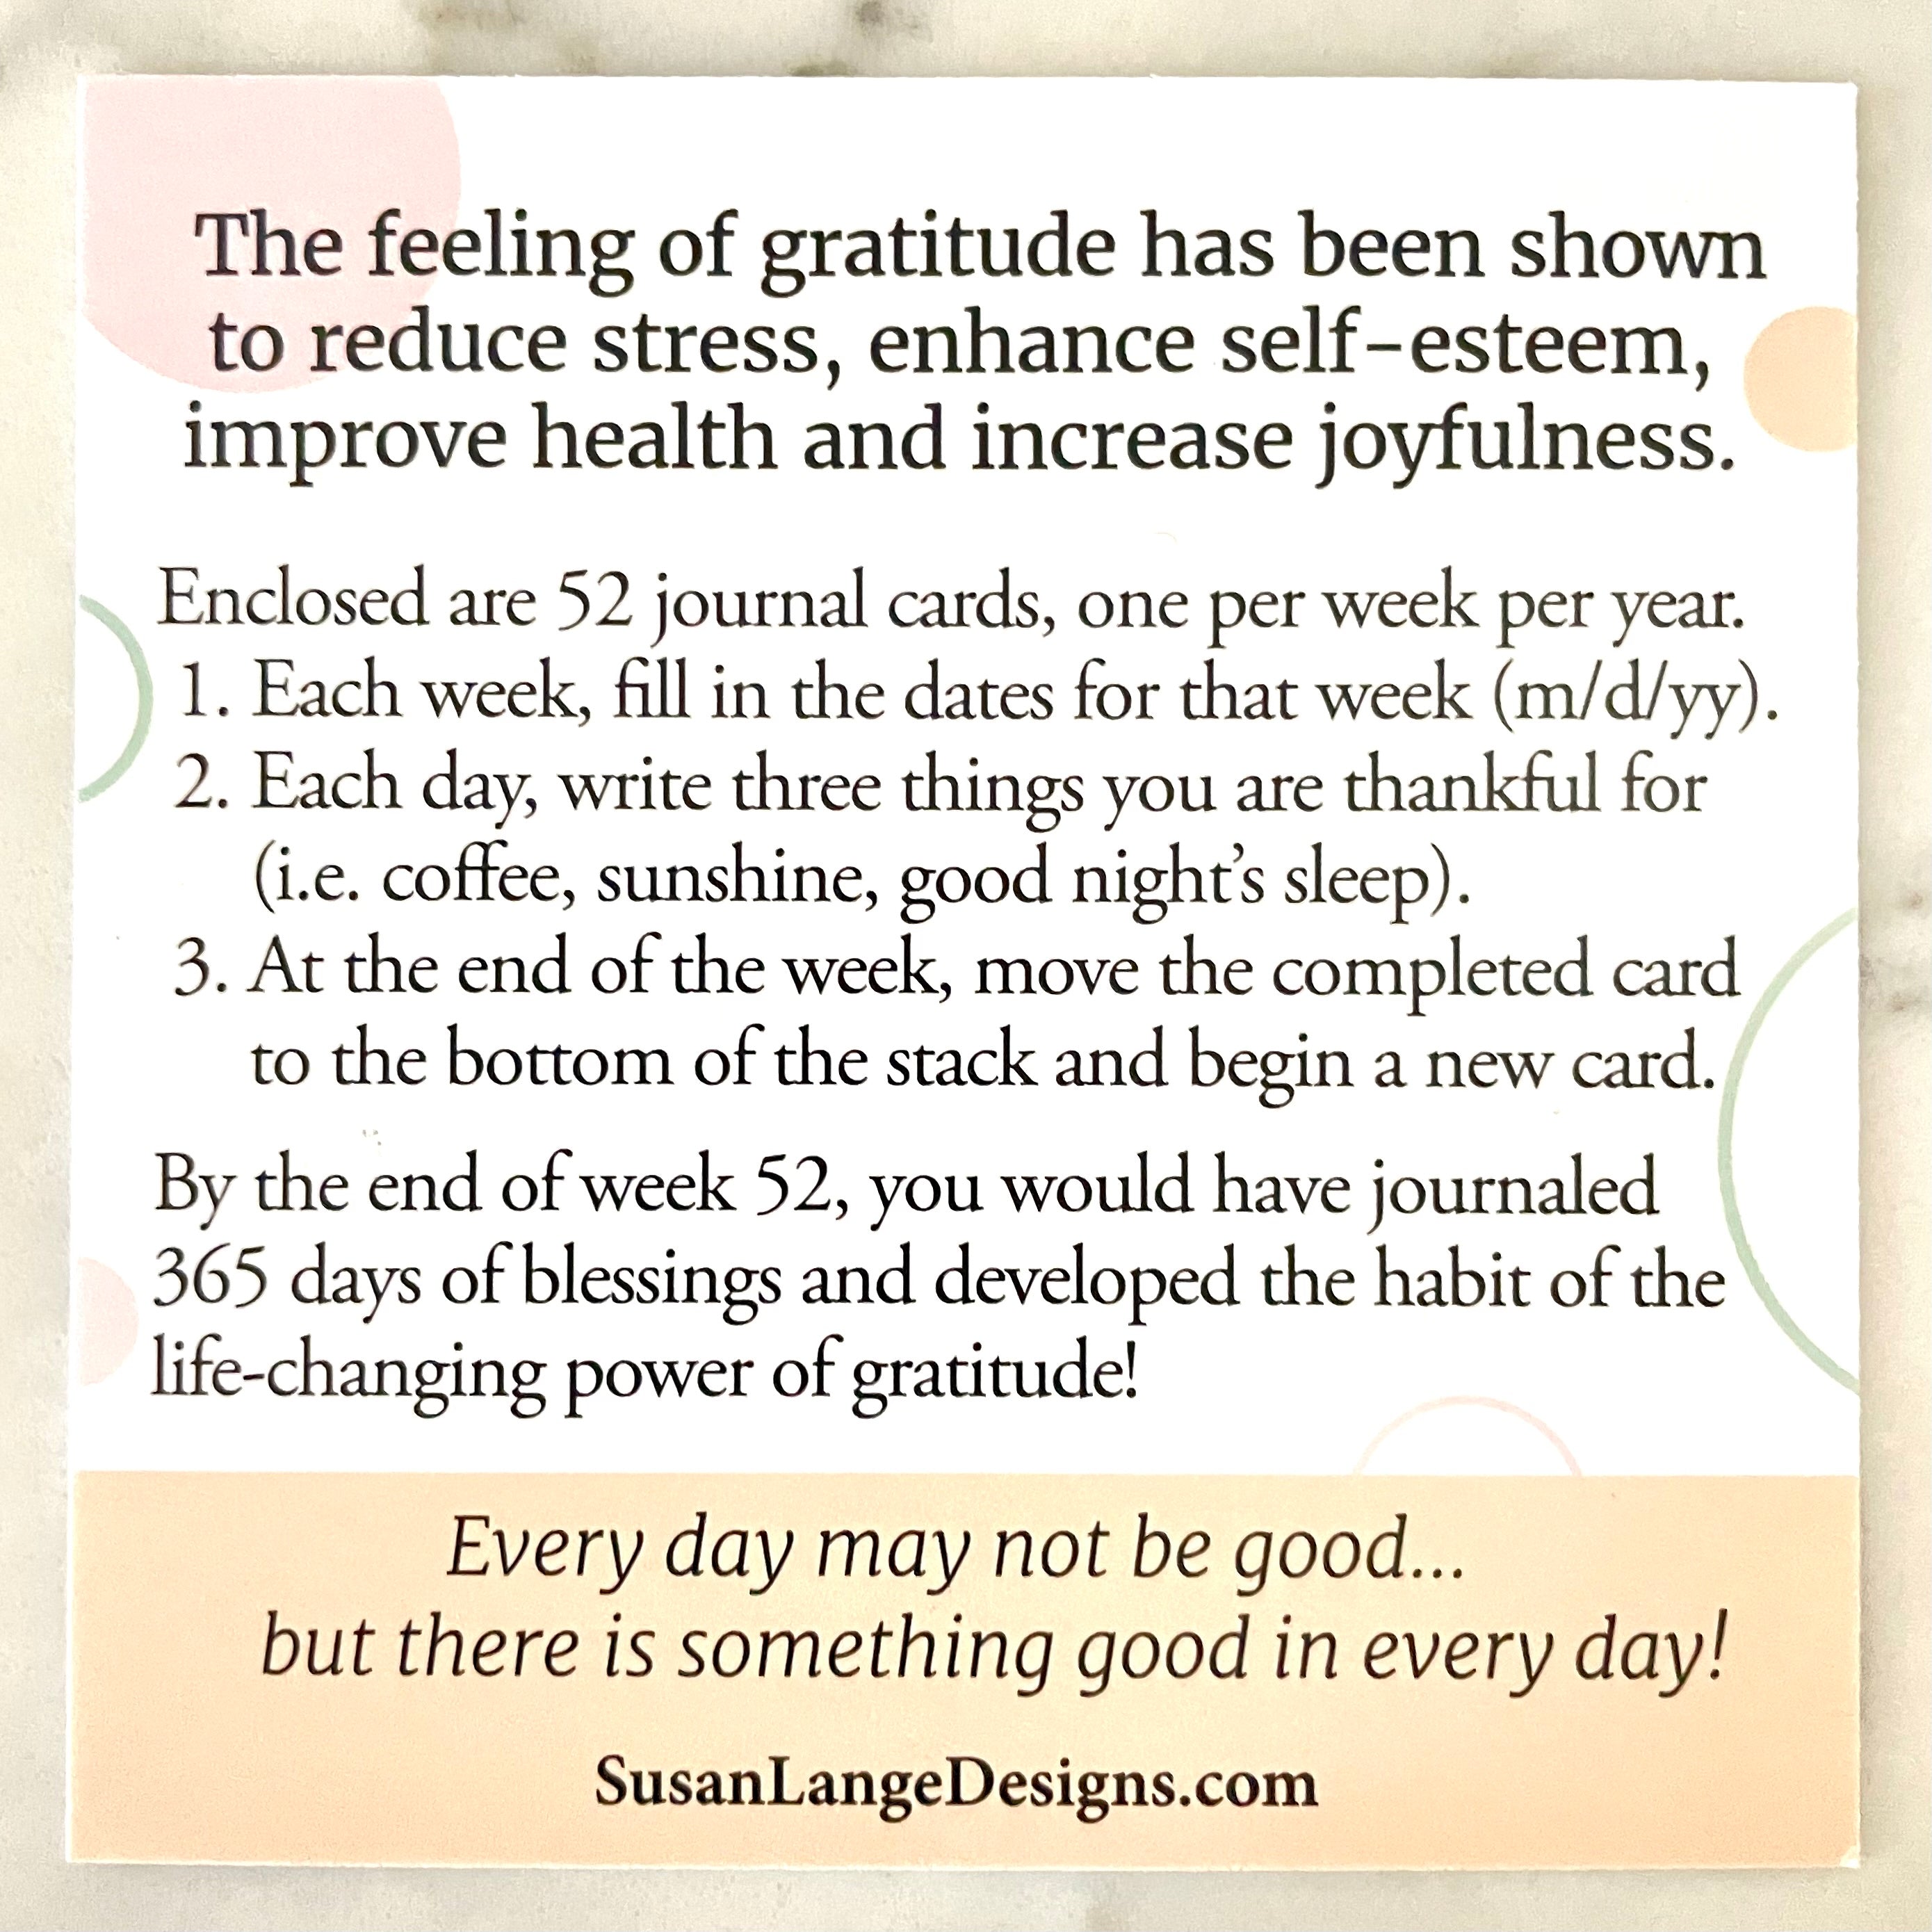 Journal Cards to Grow In Gratitude